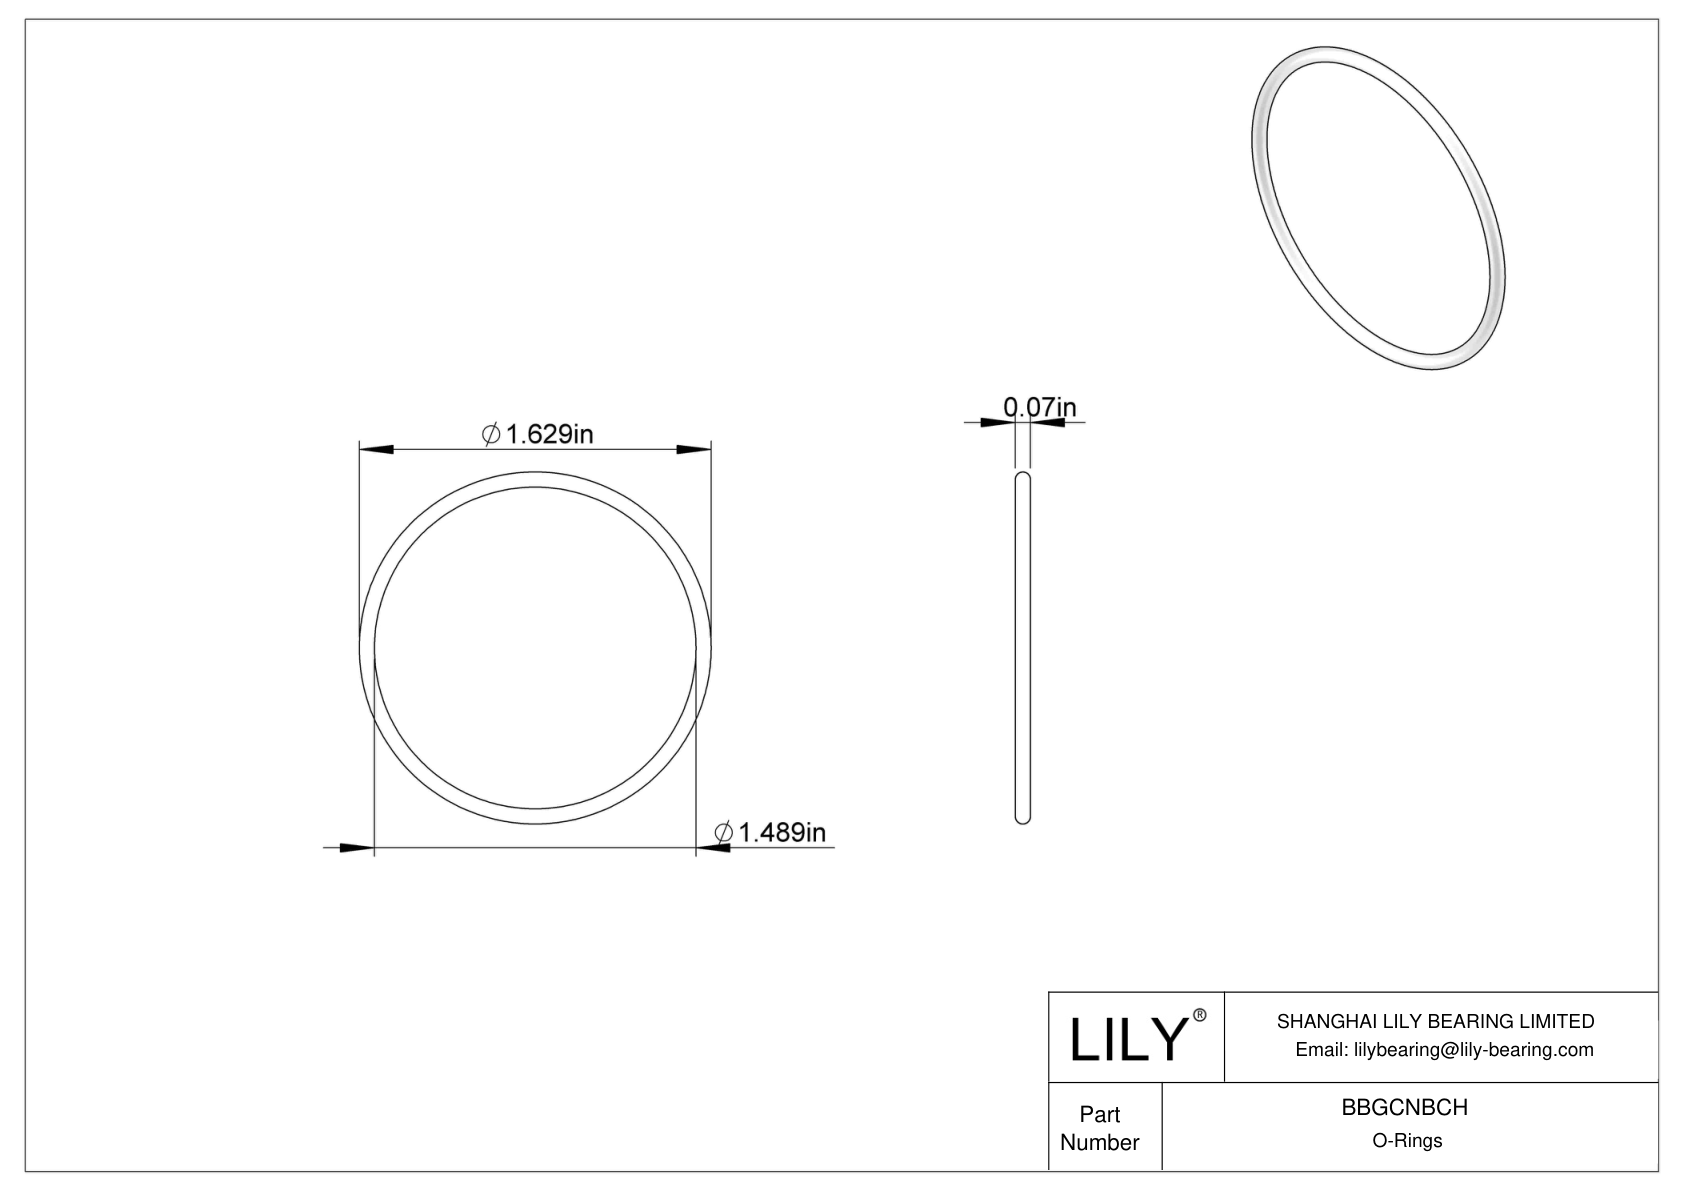 BBGCNBCH High Temperature O-Rings Round cad drawing